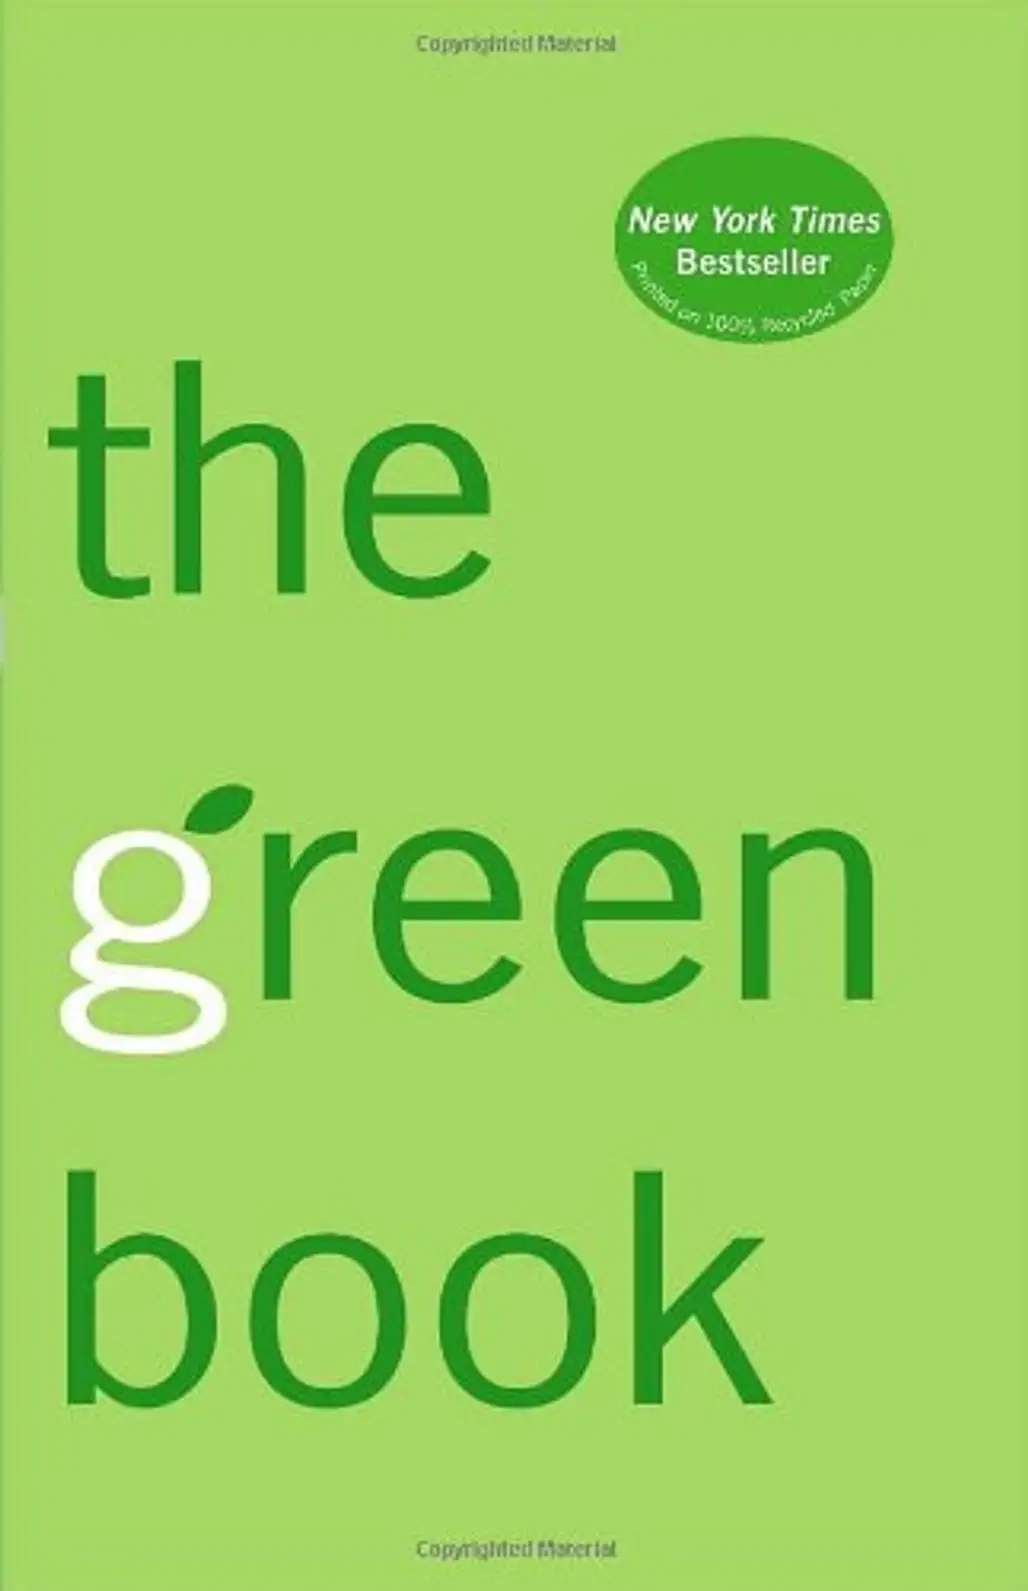 “the Green Book” by Elizabeth Rogers and Thomas M. Kostigan